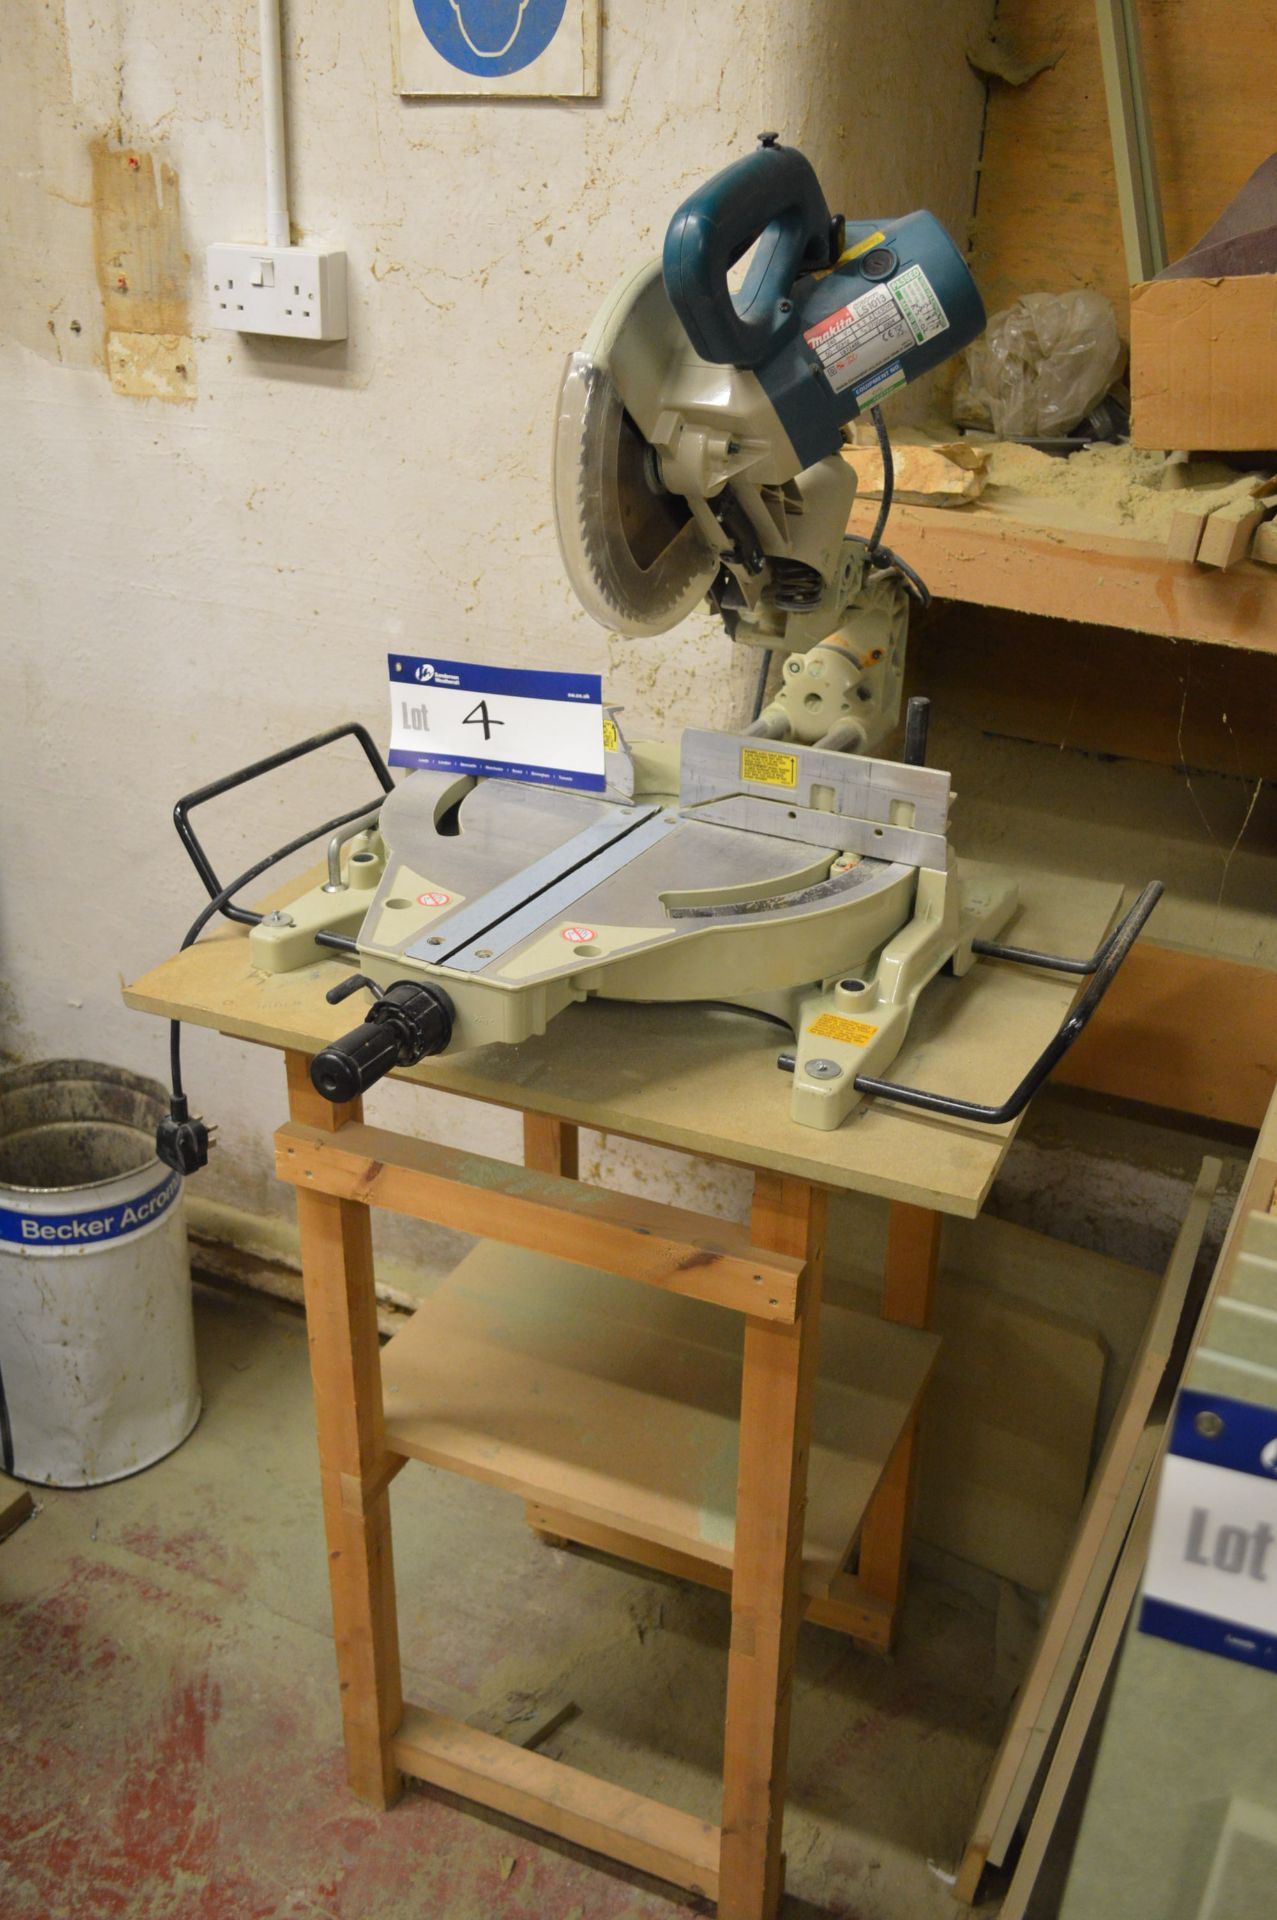 Makita LS1013 Bench Top Mitre Saw, 240V, with timber stand (lot located at Vale Mill, Micklehurst - Image 3 of 4